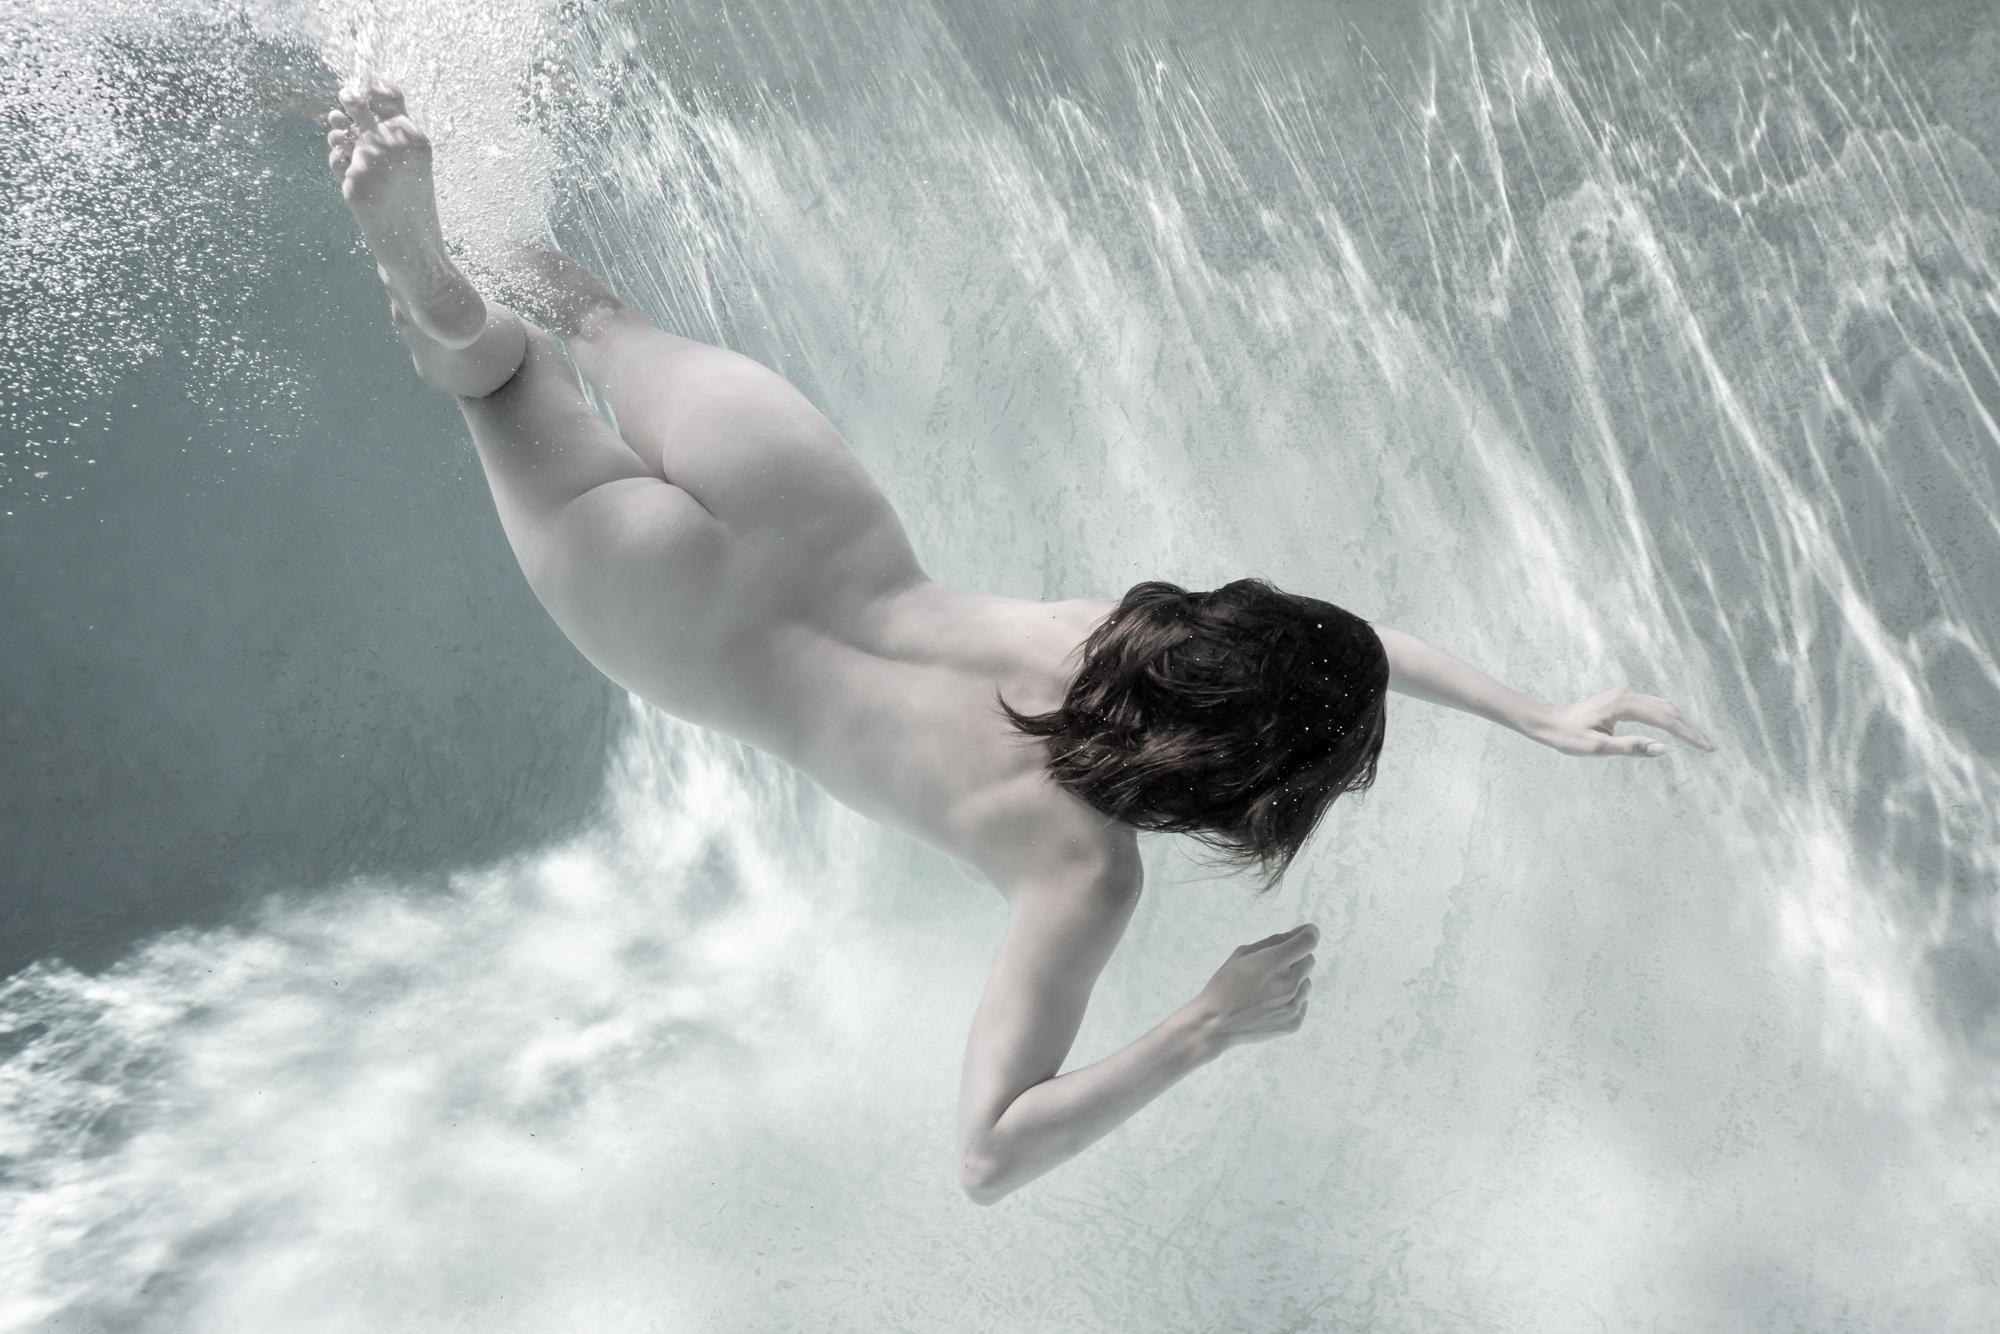 Sweet and Spicy - underwater nude photograph - archival pigment print 18x24"